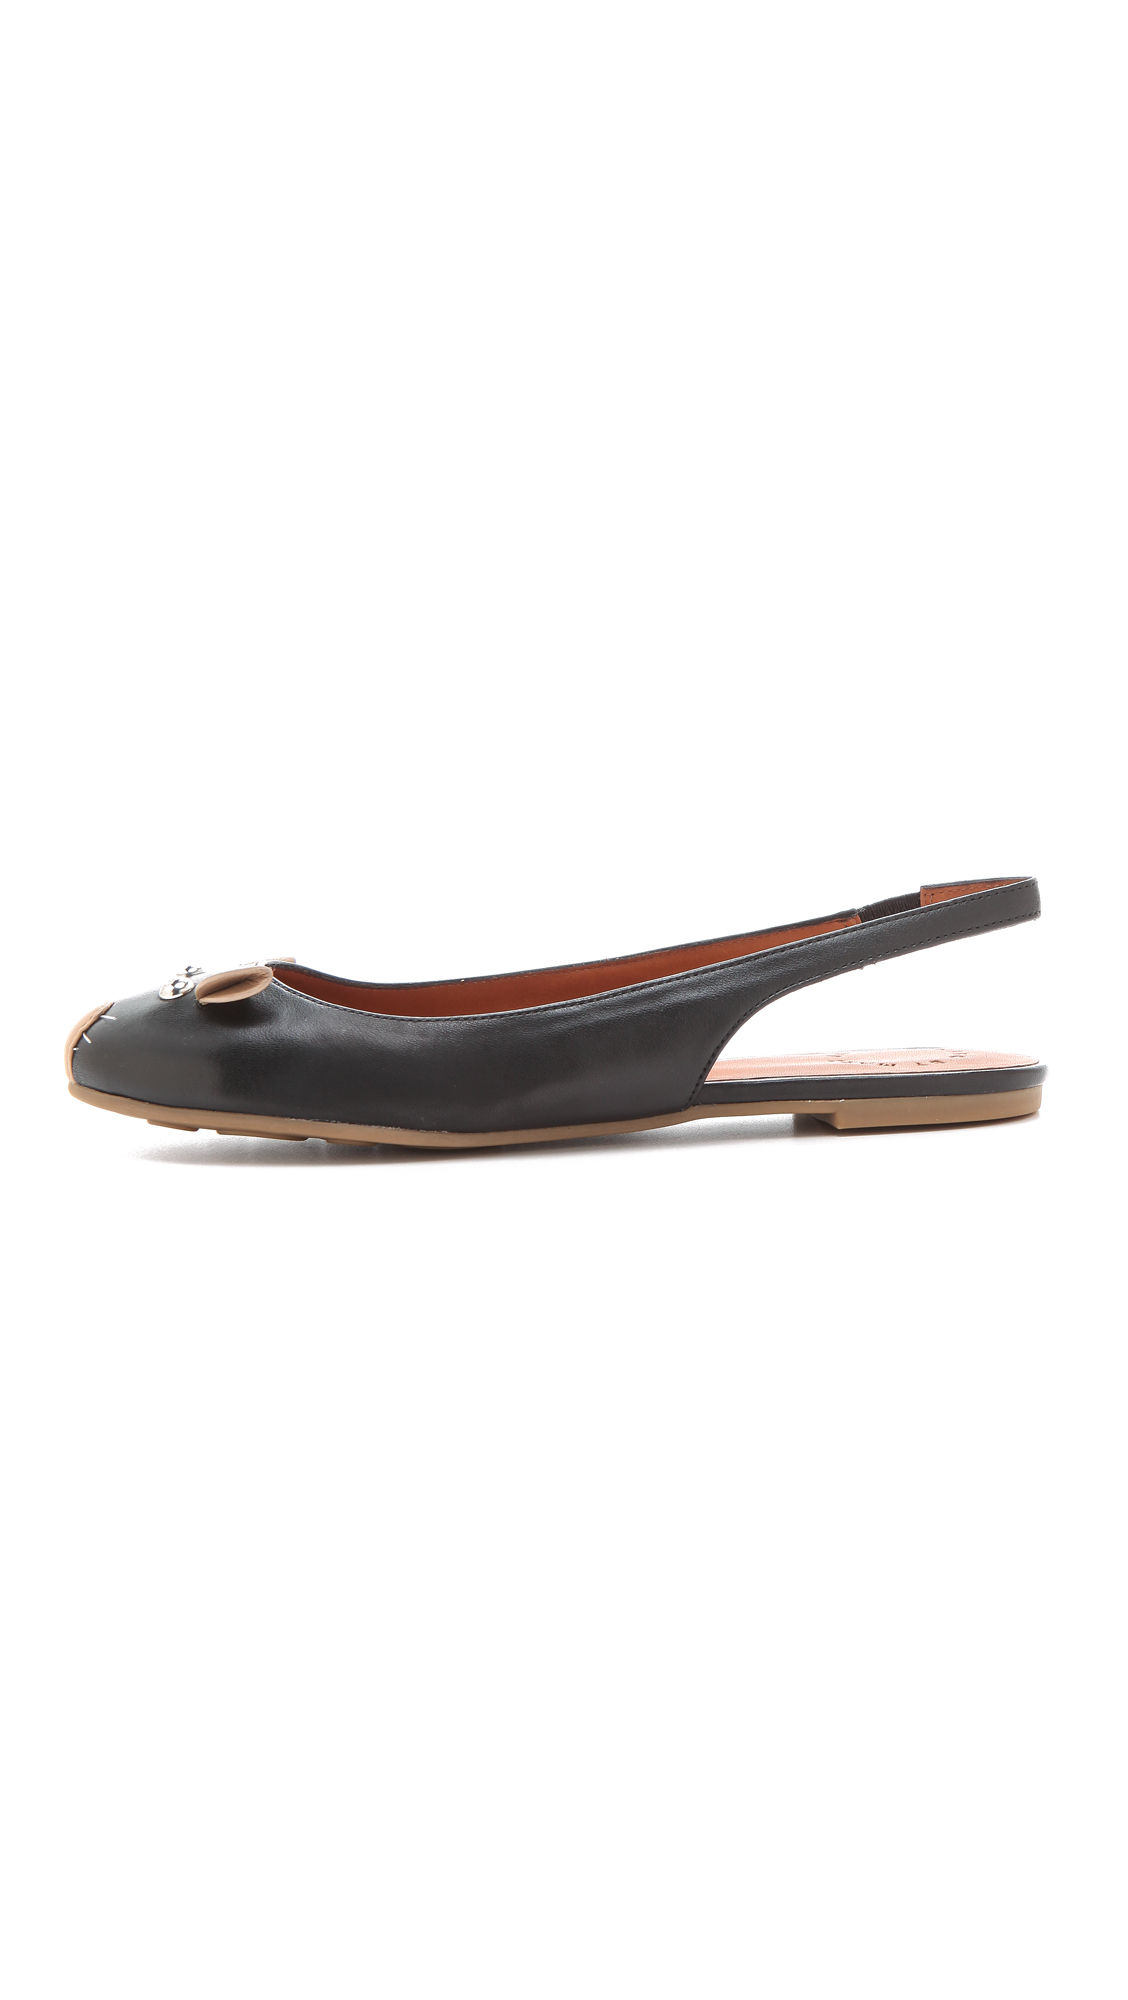 Marc by marc jacobs Slingback Mouse Flats in Black | Lyst